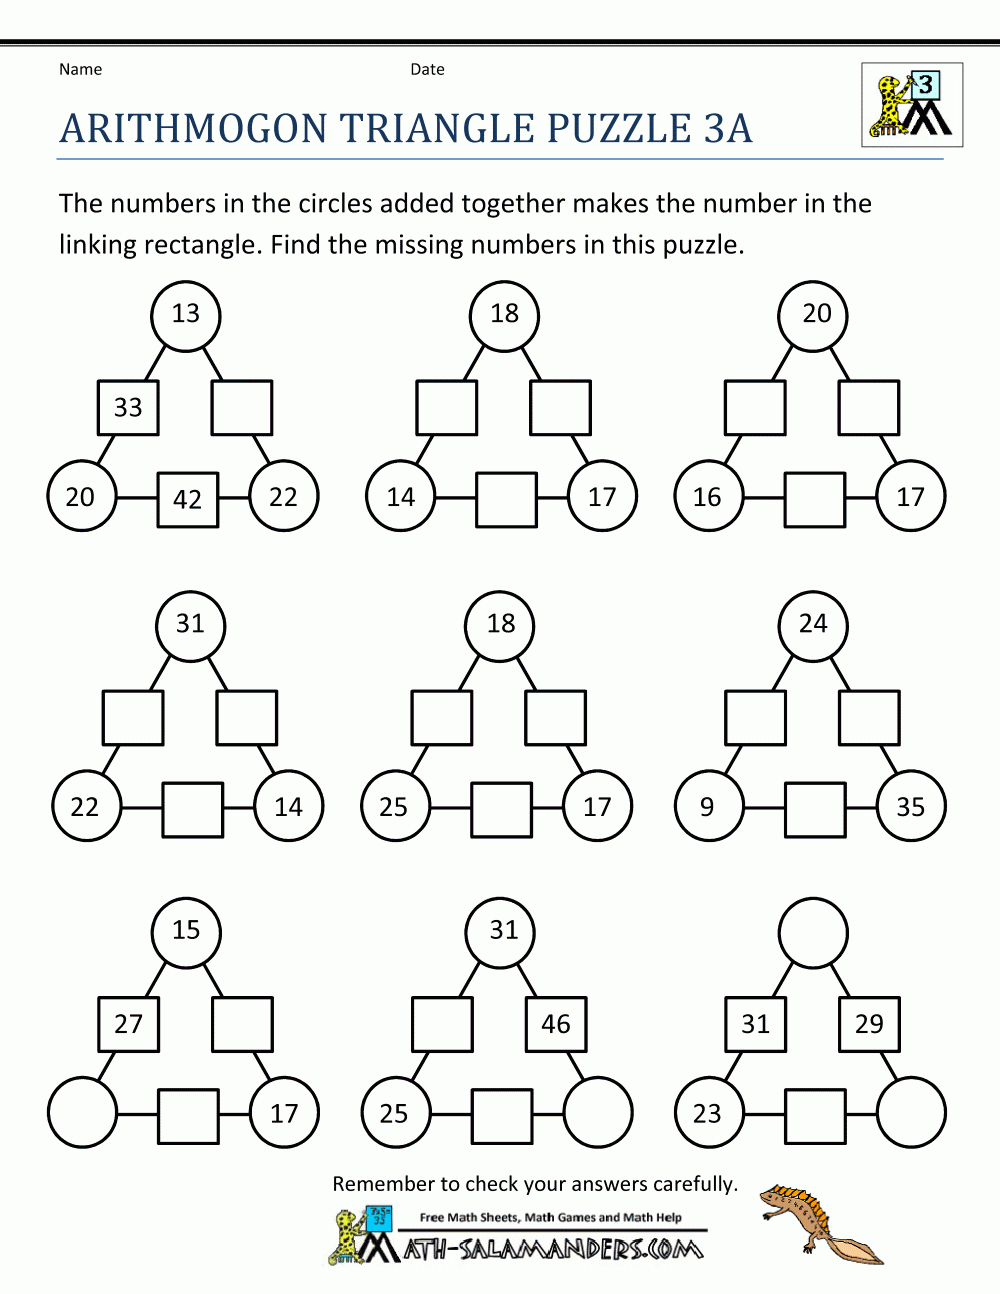 Math Puzzle Worksheets 3Rd Grade - Printable Puzzles Games